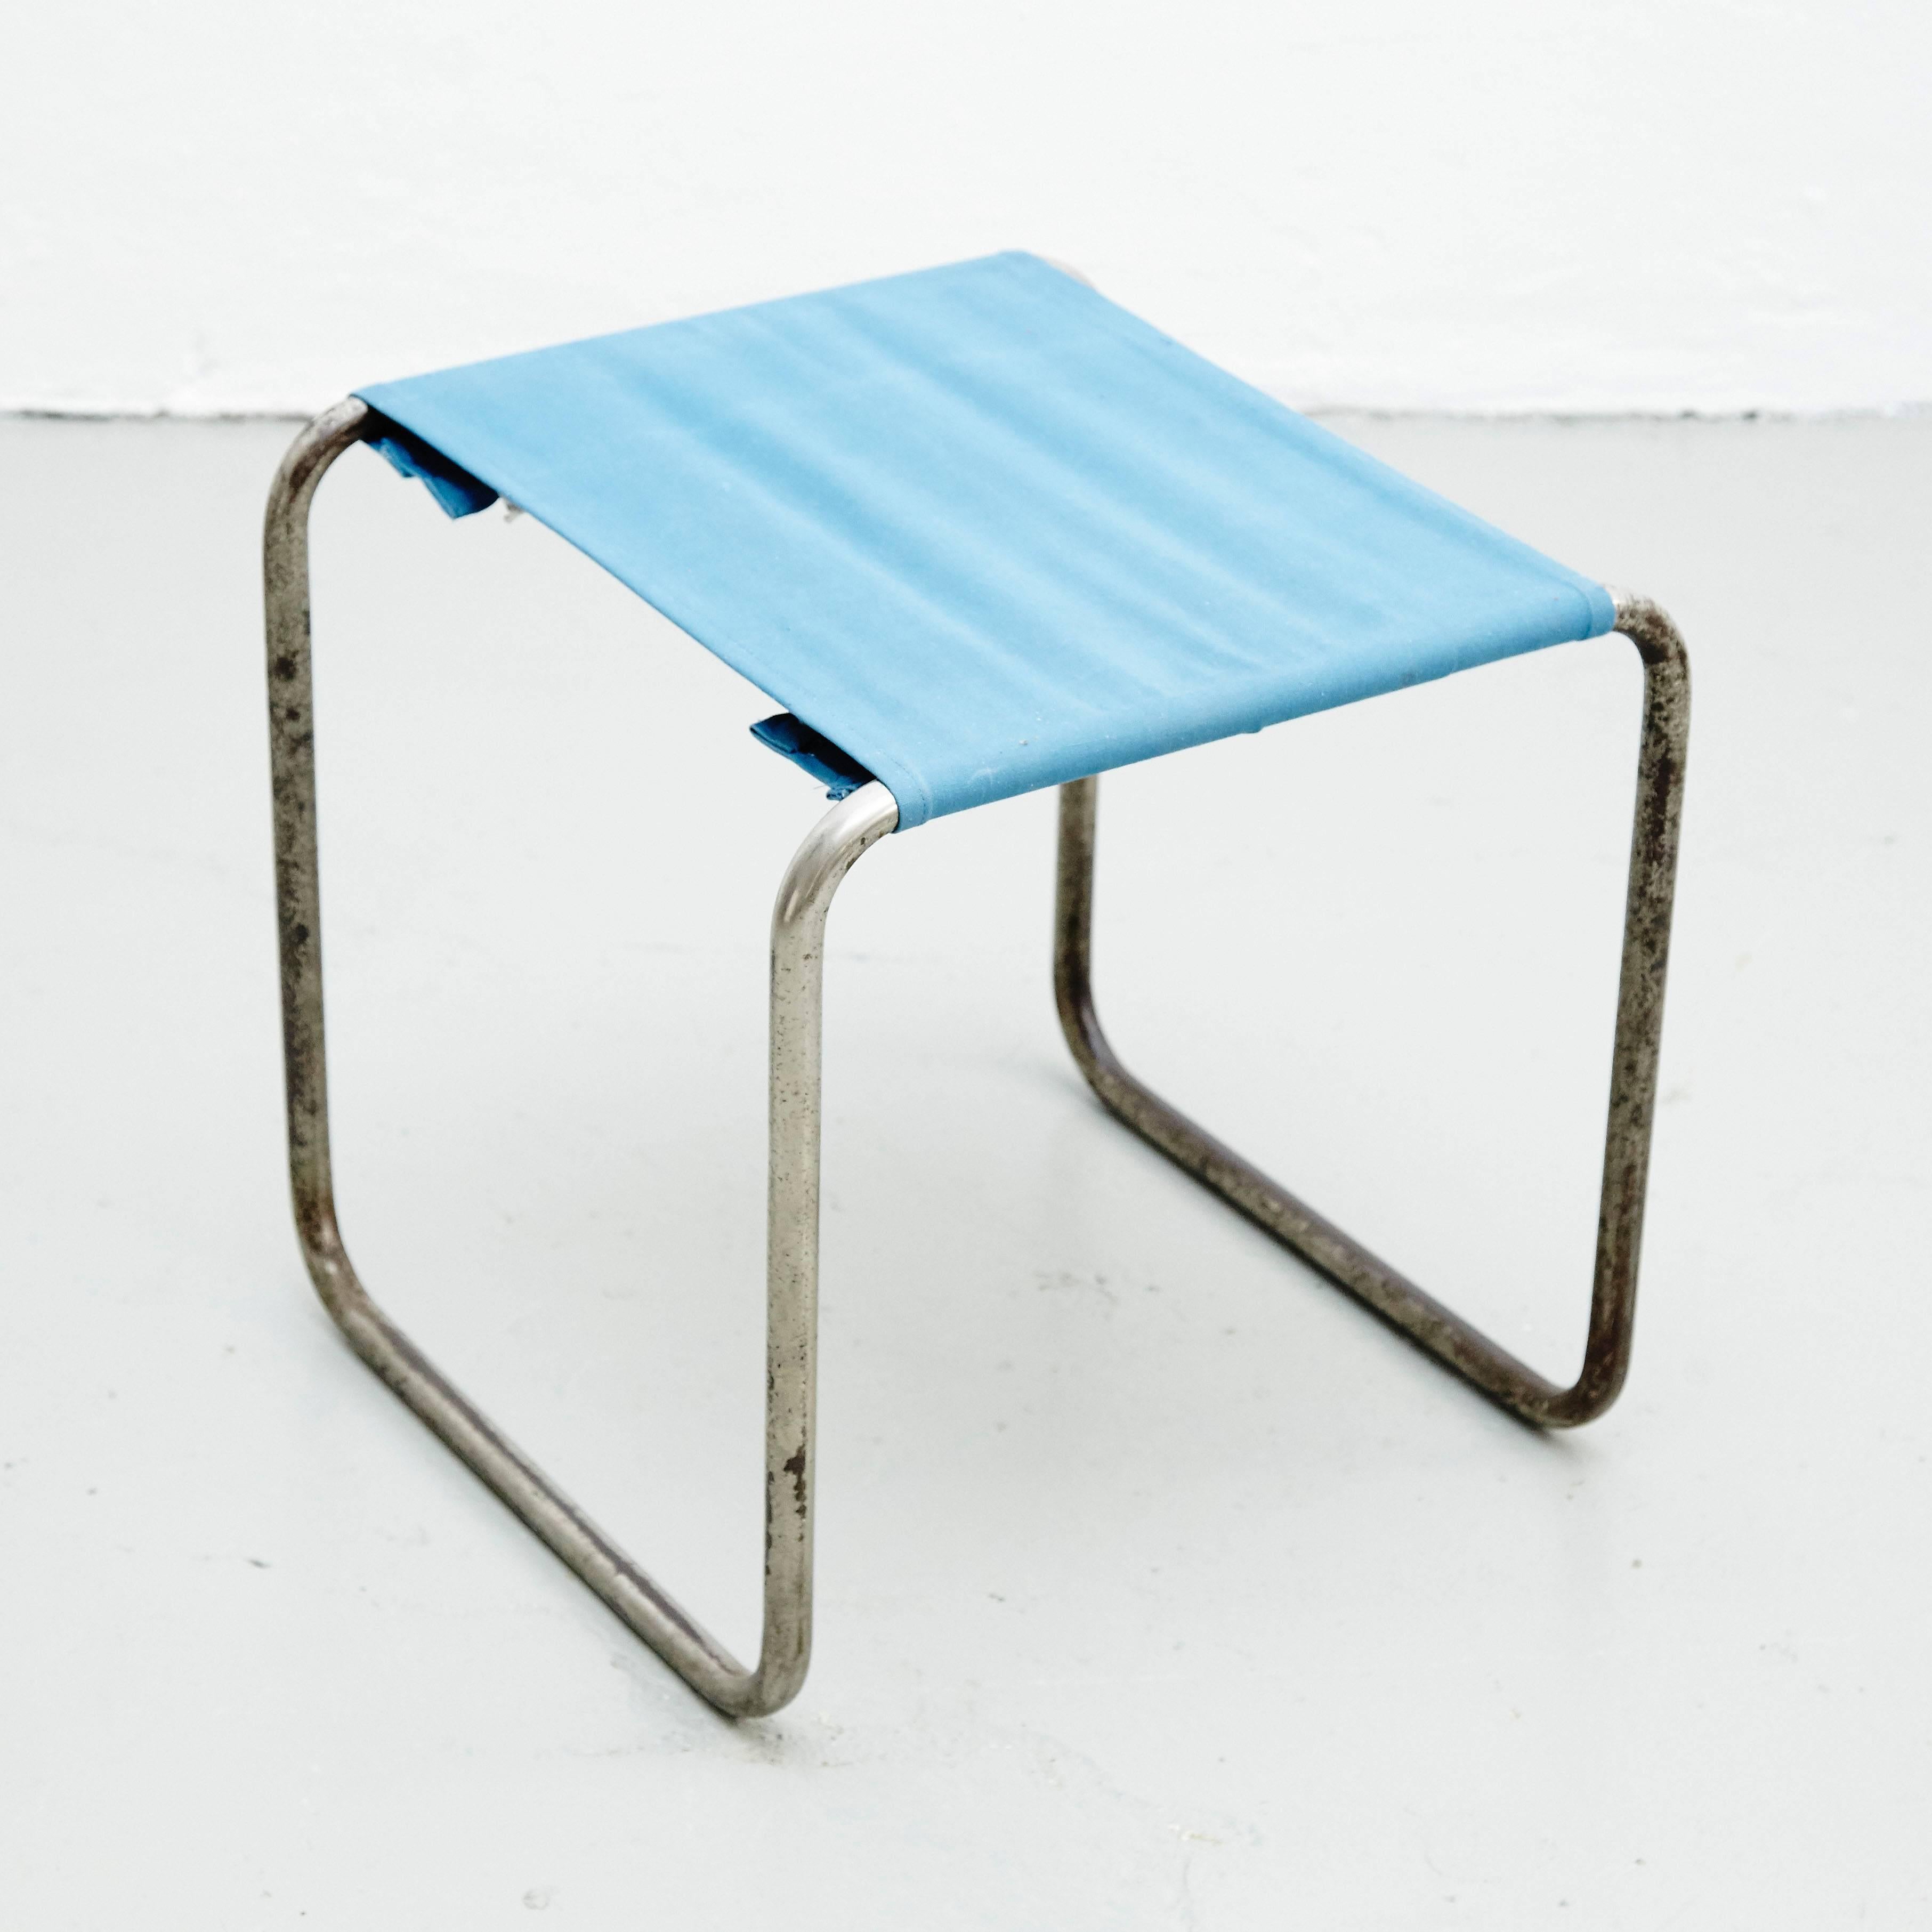 Marcel Breuer B9T Stool for Thonet with Blue Fabric and Metal Tube, circa 1930 (Deutsch)